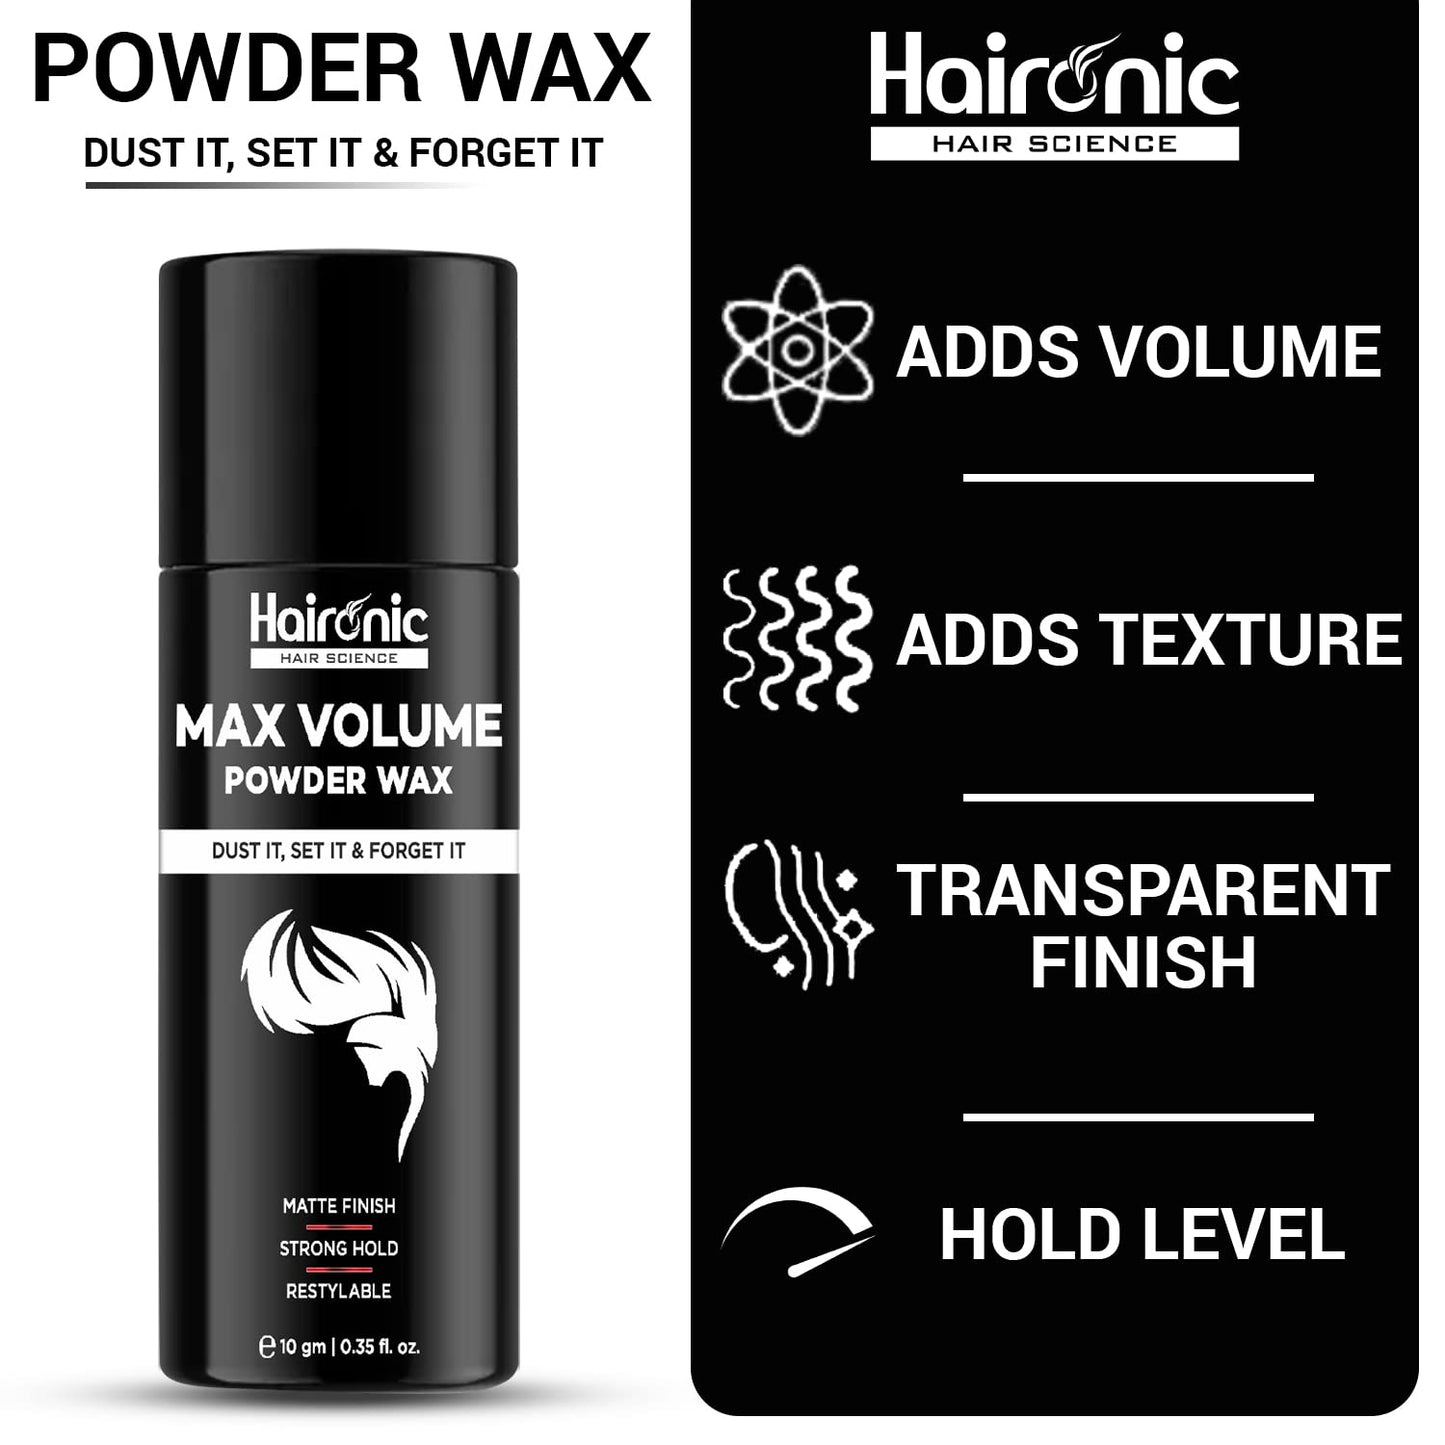 Haironic Hair Volumizing Powder Wax For Men  Strong Hold With Matte Finish Hair Styling  All Natural Hair Styling Powder  For All Hair types - 10gm Pack of 30